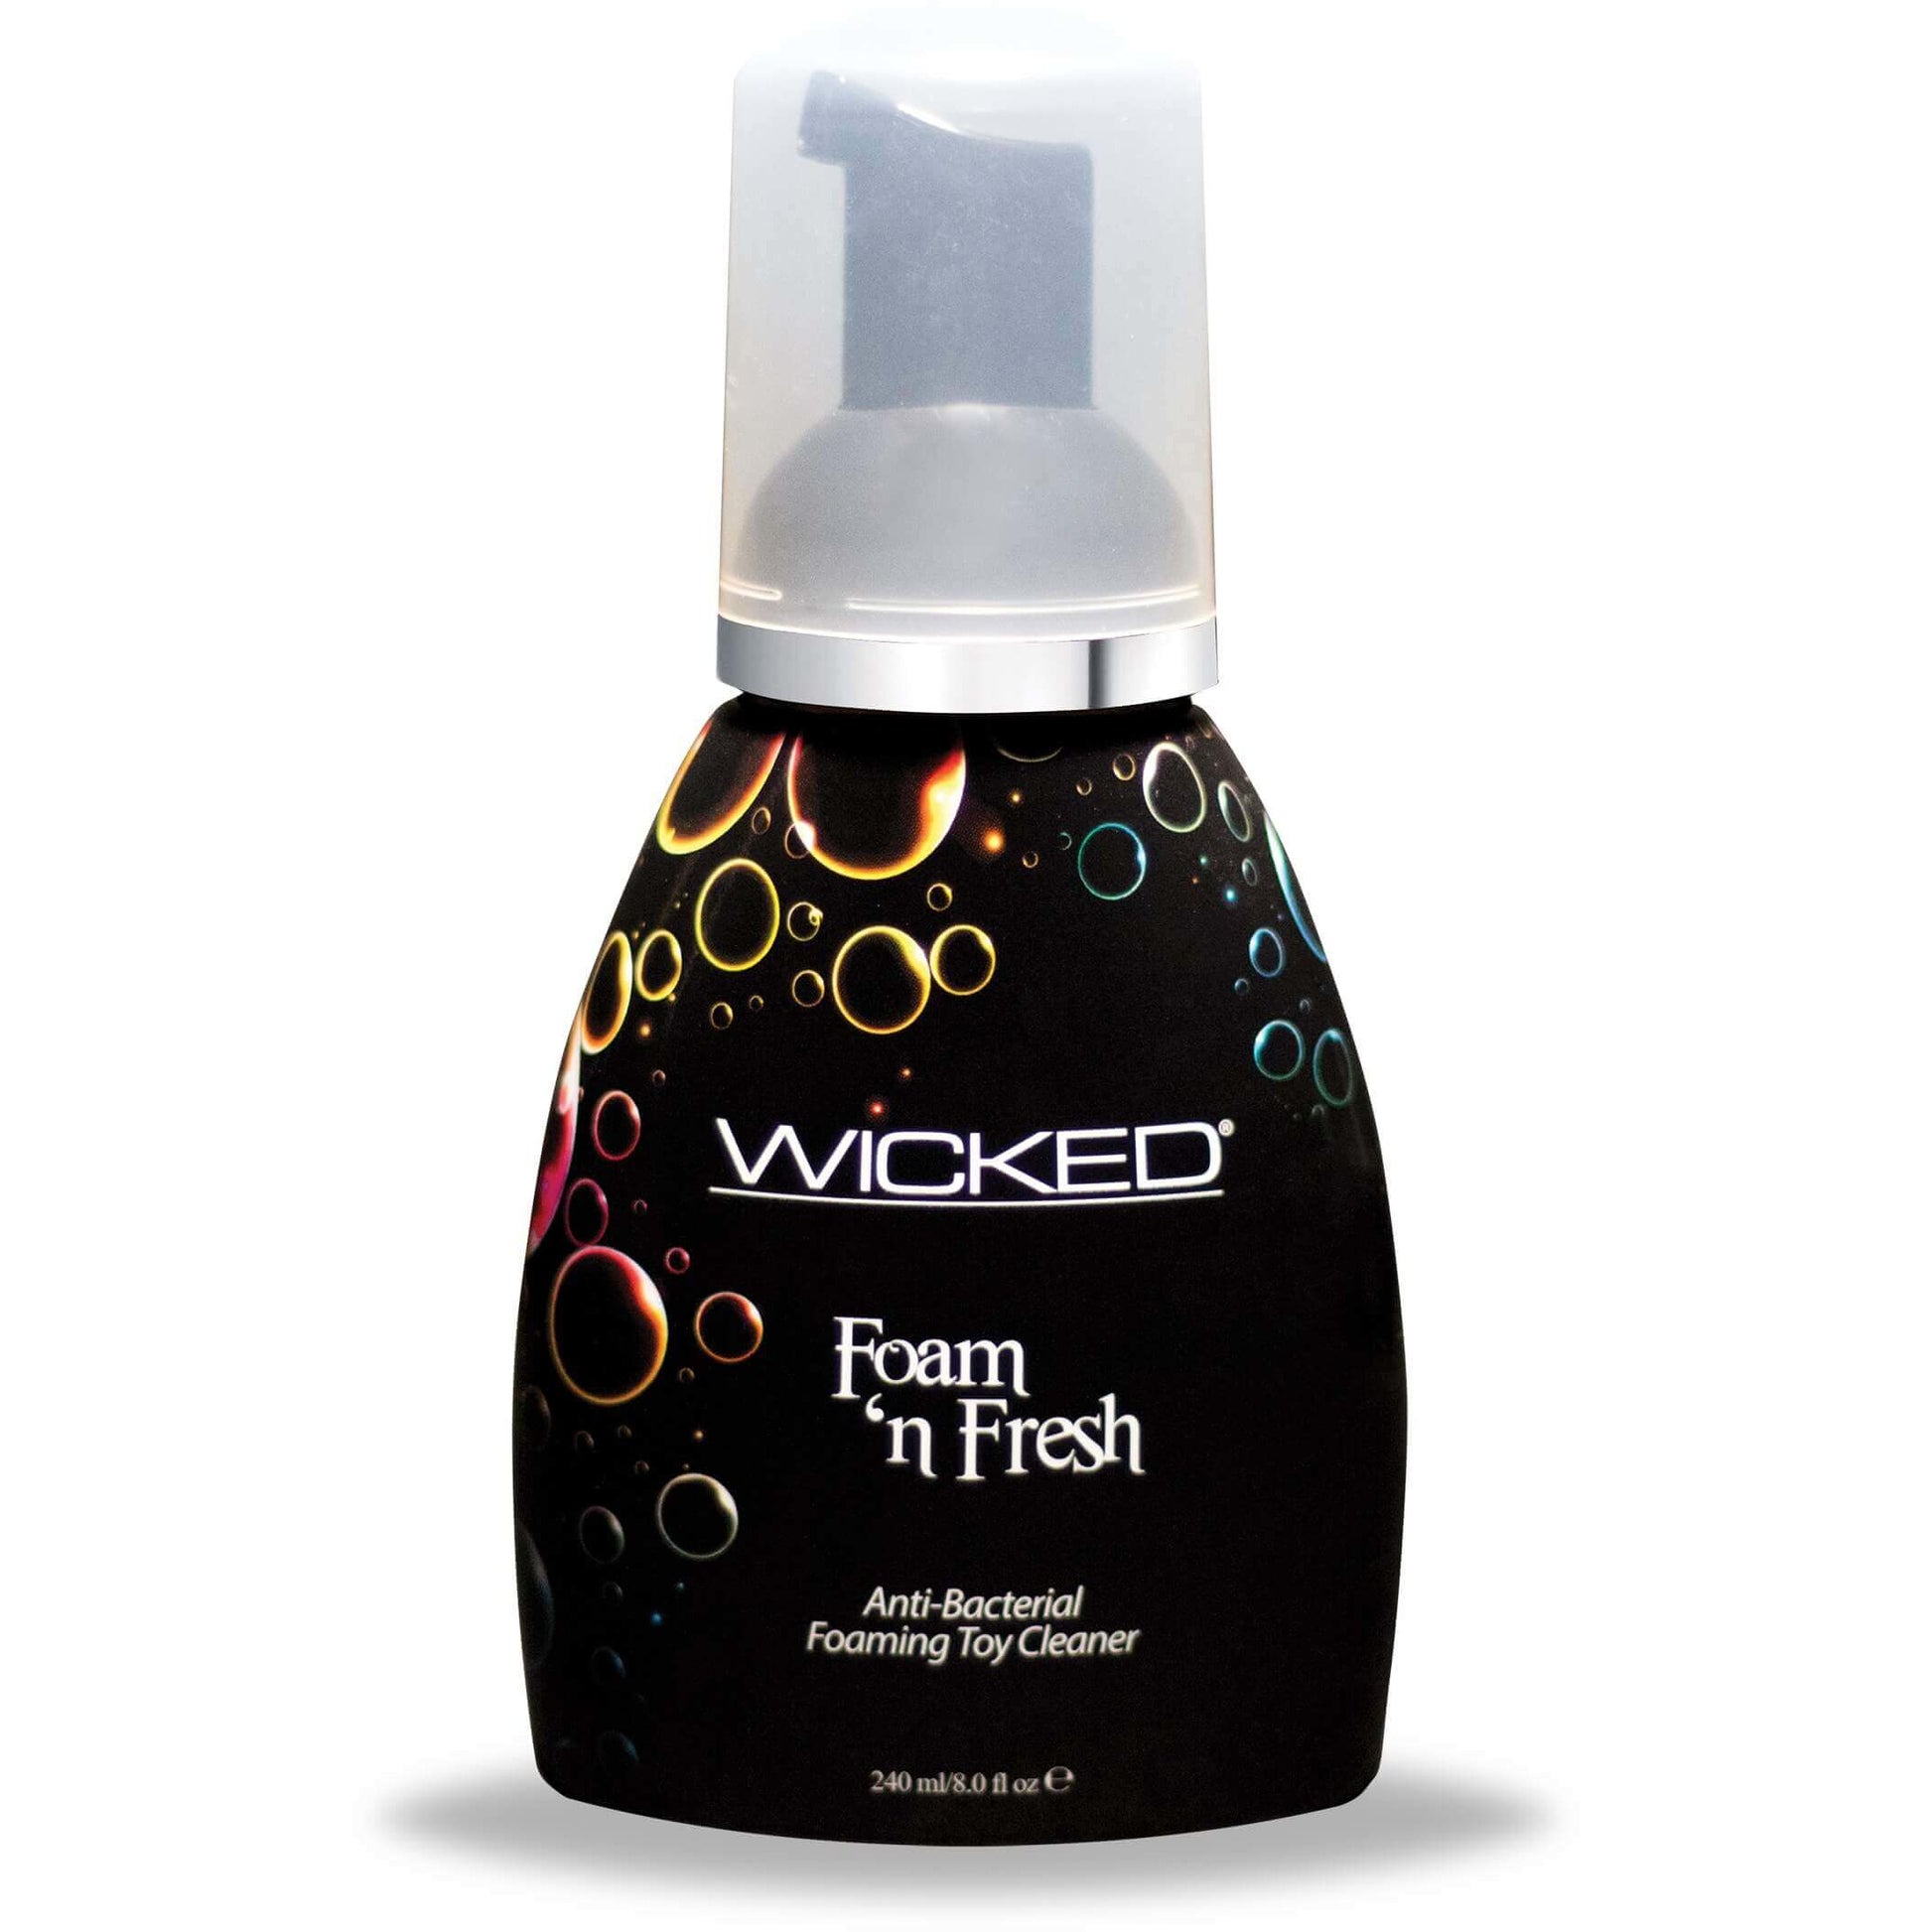 Wicked Foam ‘n Fresh Toy Cleaner - by The Bigger O - an online sex toy shop. We ship to USA, Canada and the UK.